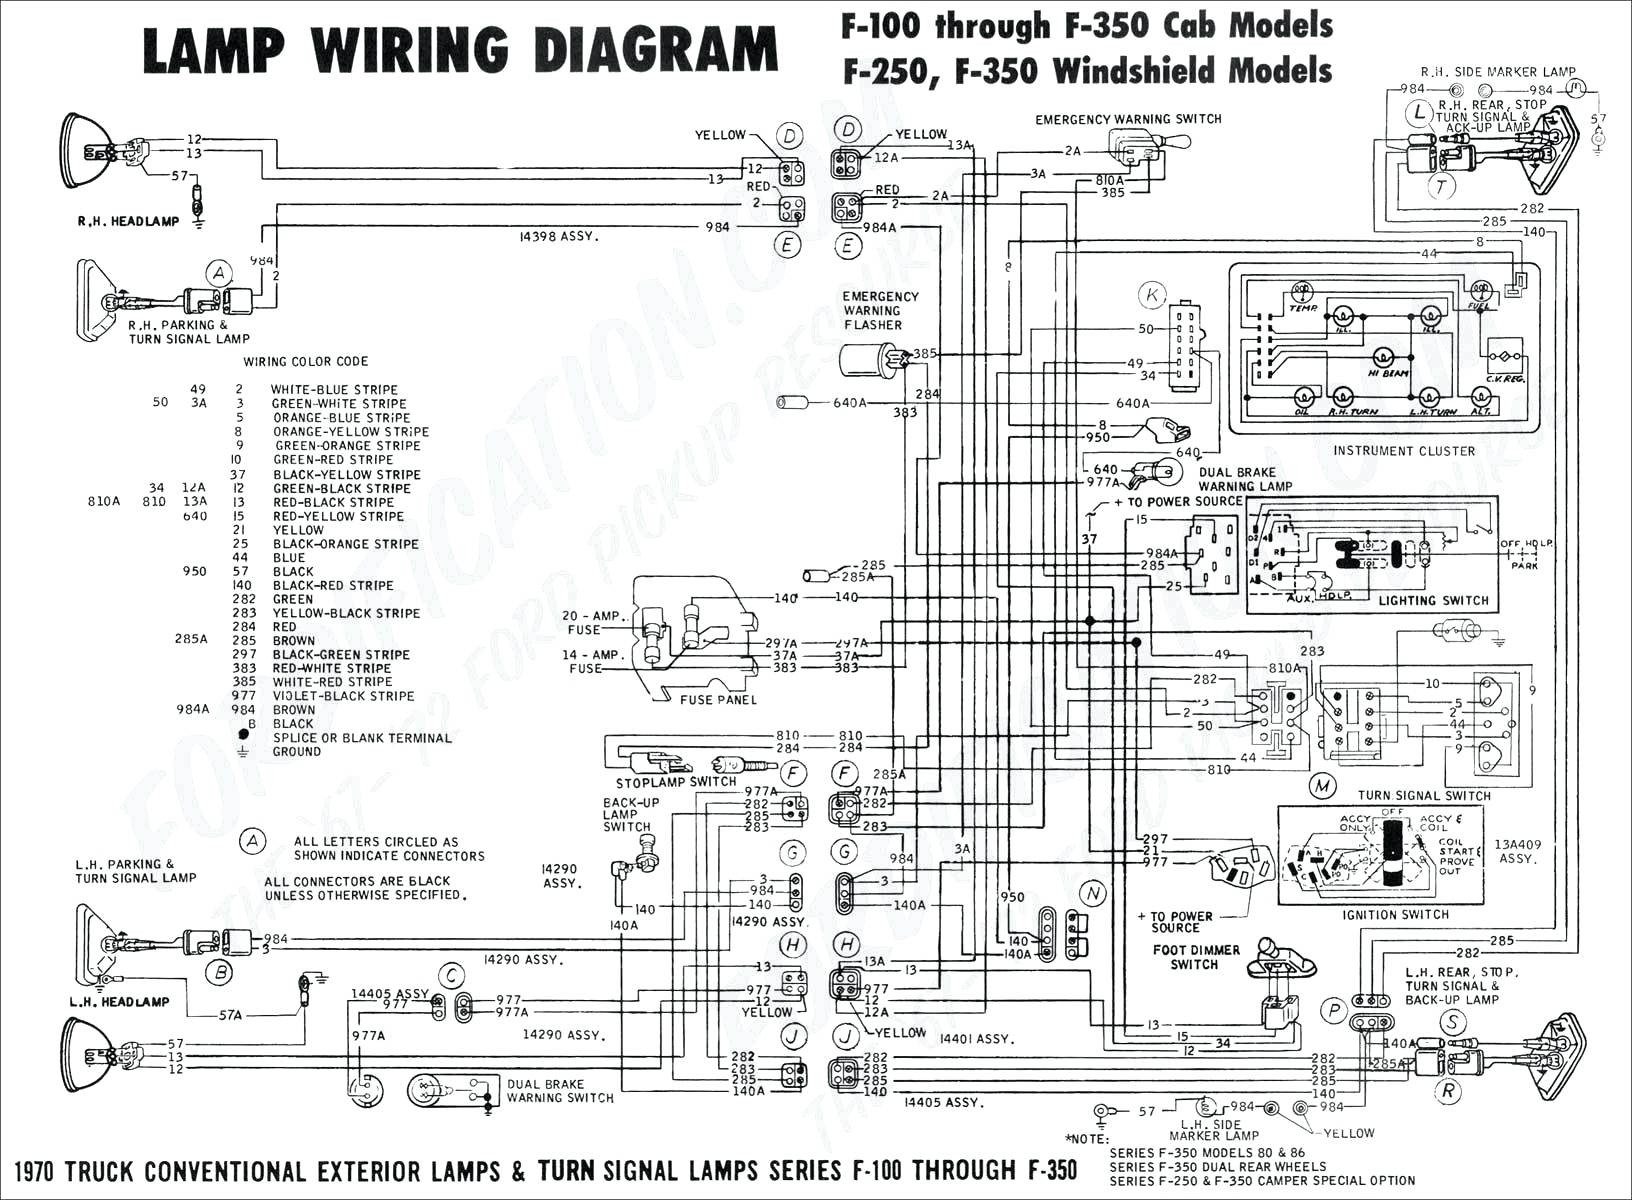 Residential Electrical Wiring Diagrams Wiring Diagram Http Pic2fly Dodge3500trailerwiringdiagram Wire Of Residential Electrical Wiring Diagrams